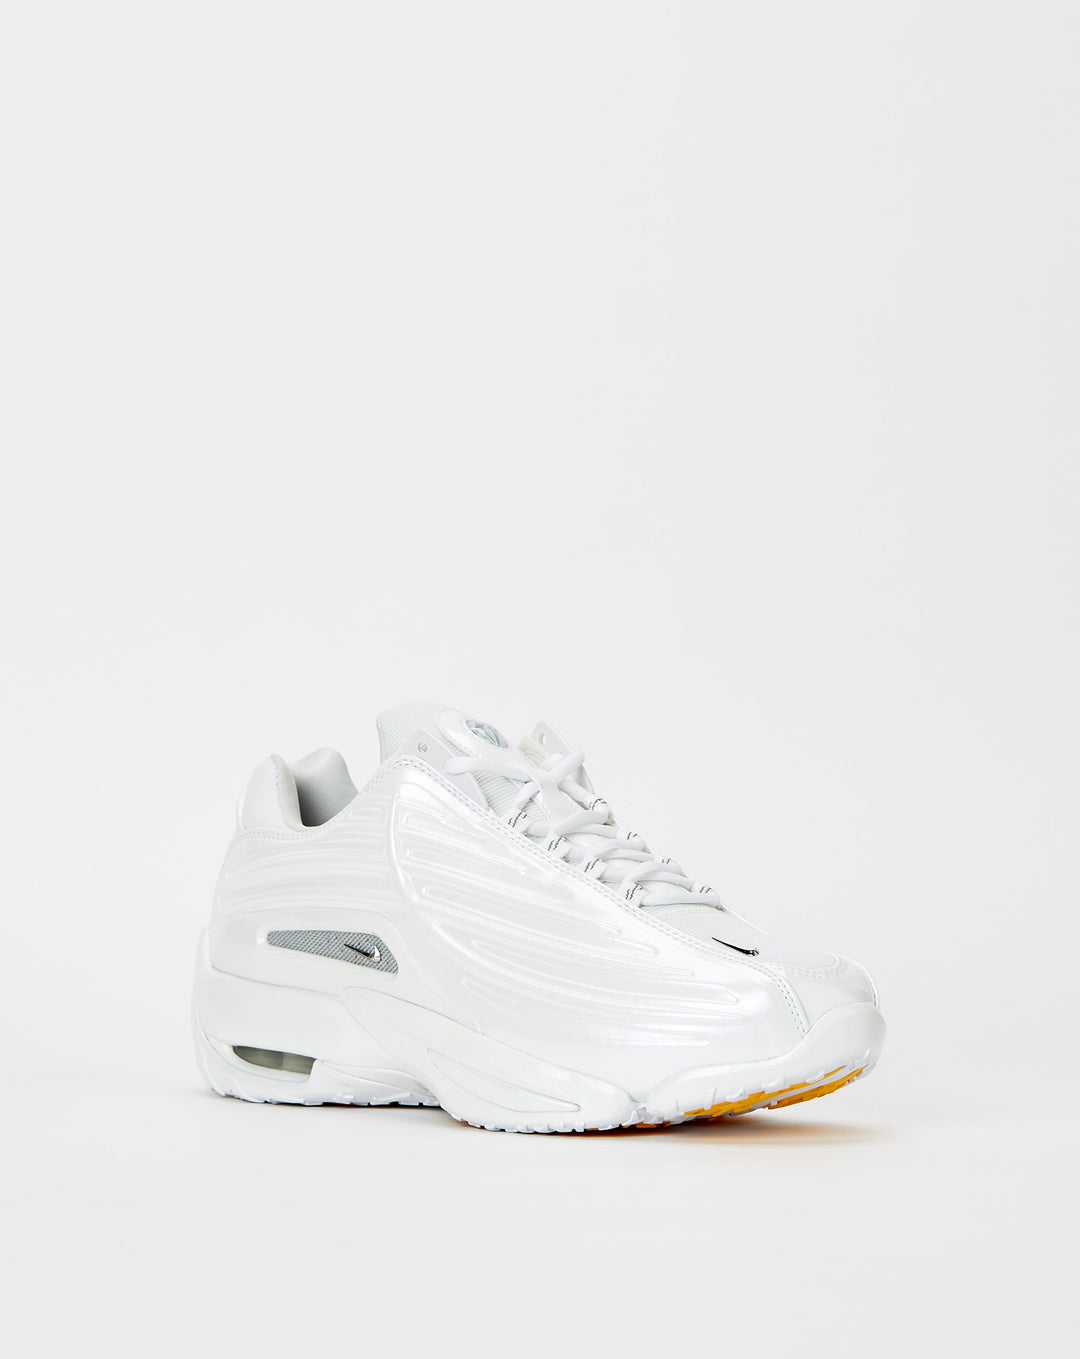 NOCTA White | Chrome | University Gold / 8.5 - Sold Out / 8 - Sold Out;  - Cheap Erlebniswelt-fliegenfischen Jordan outlet